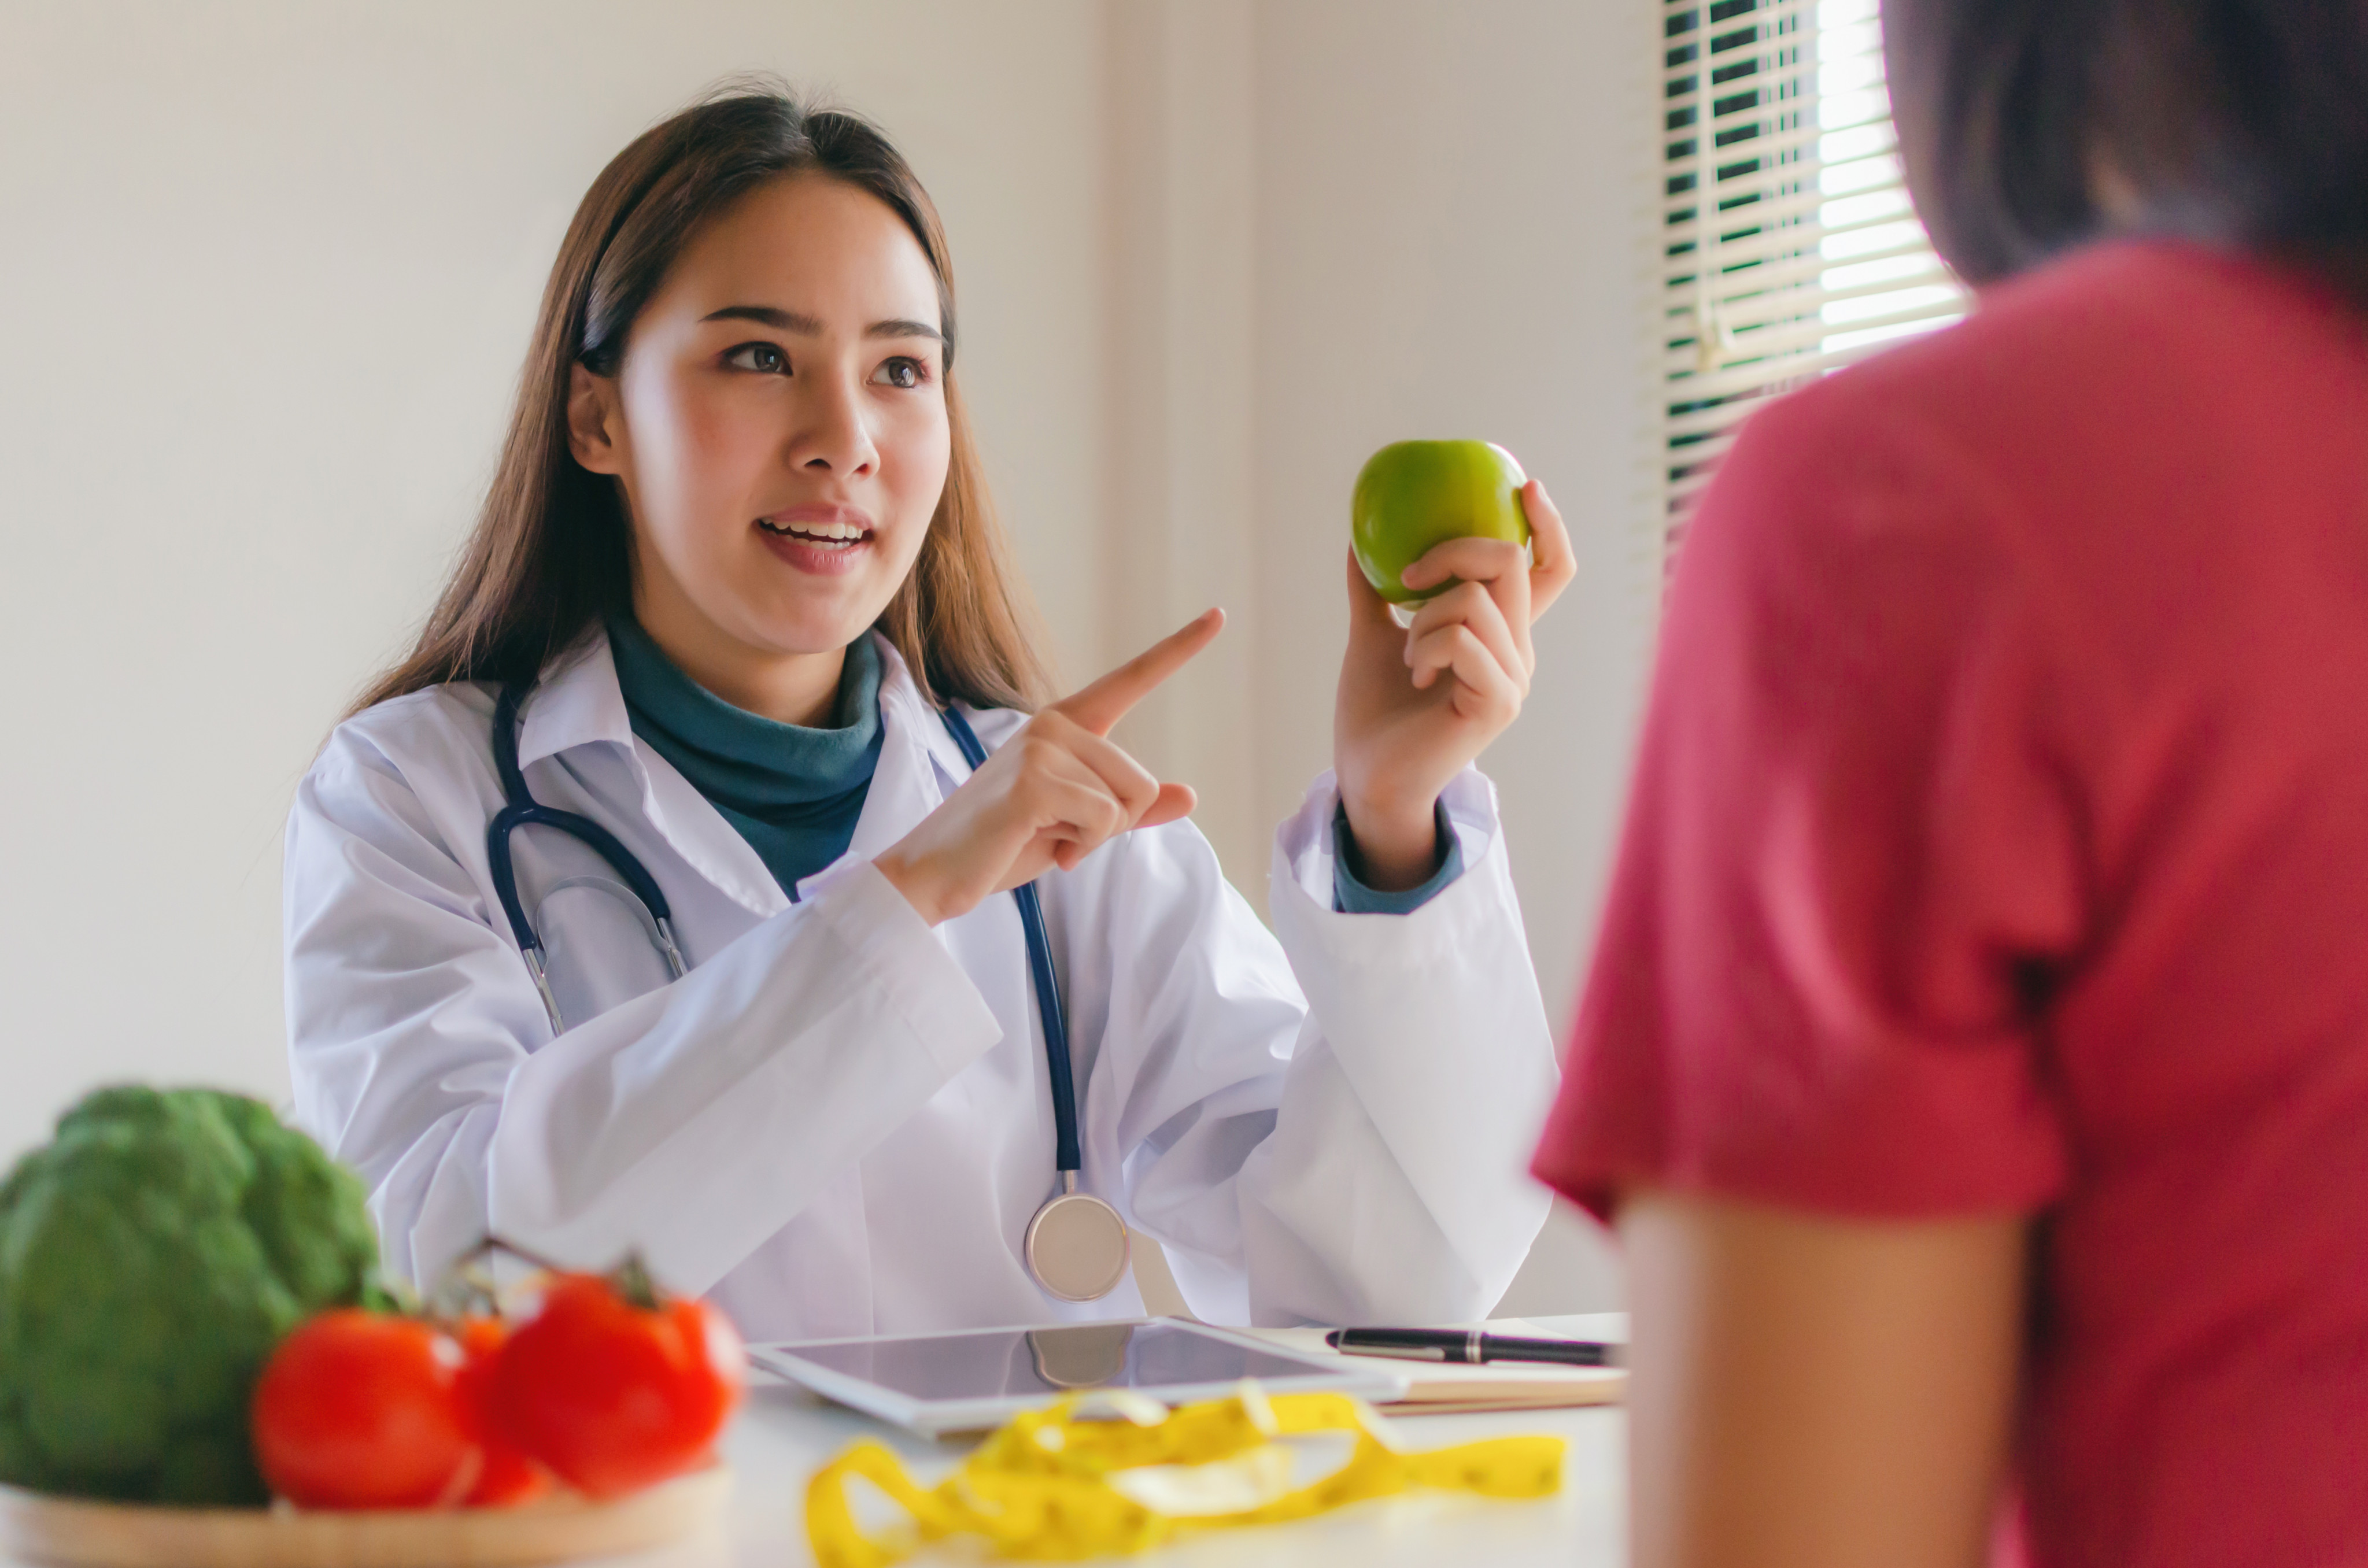 It’s not only an apple a day that keeps the doctor away. Fruits and vegetables are great sources of nutrients that research shows prevent diseases and even help reverse them. Photo: Shutterstock